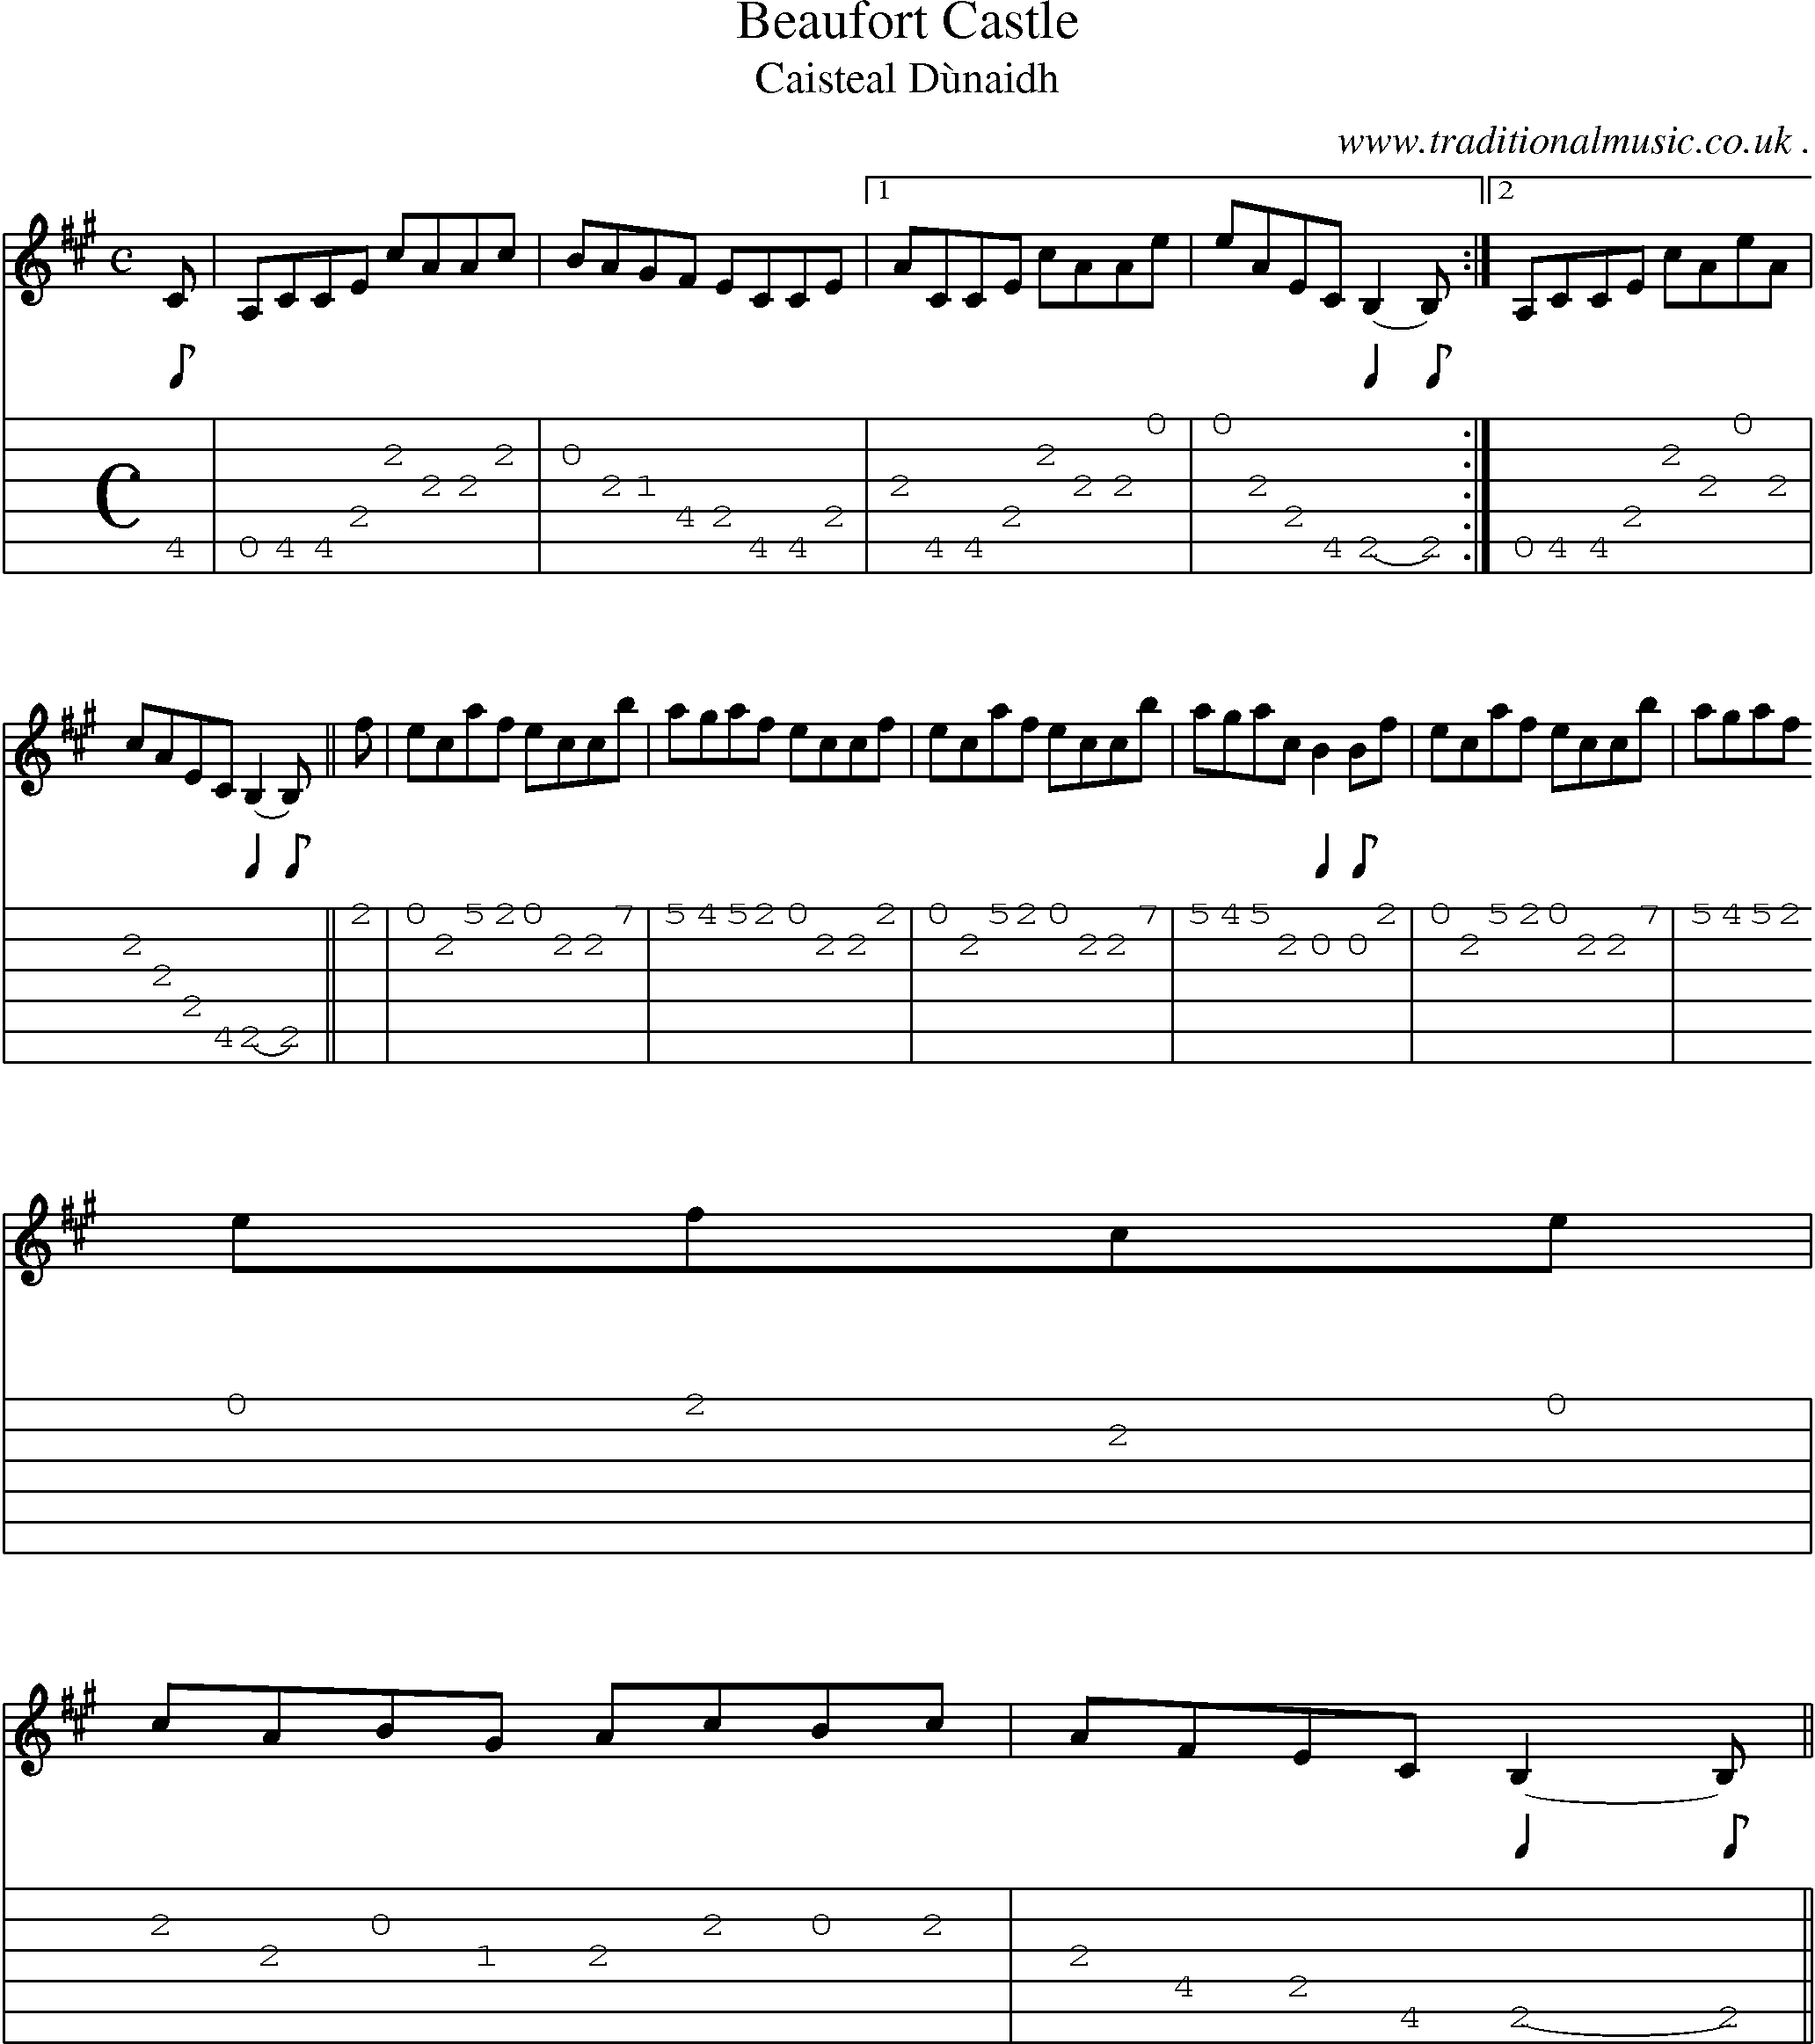 Sheet-music  score, Chords and Guitar Tabs for Beaufort Castle